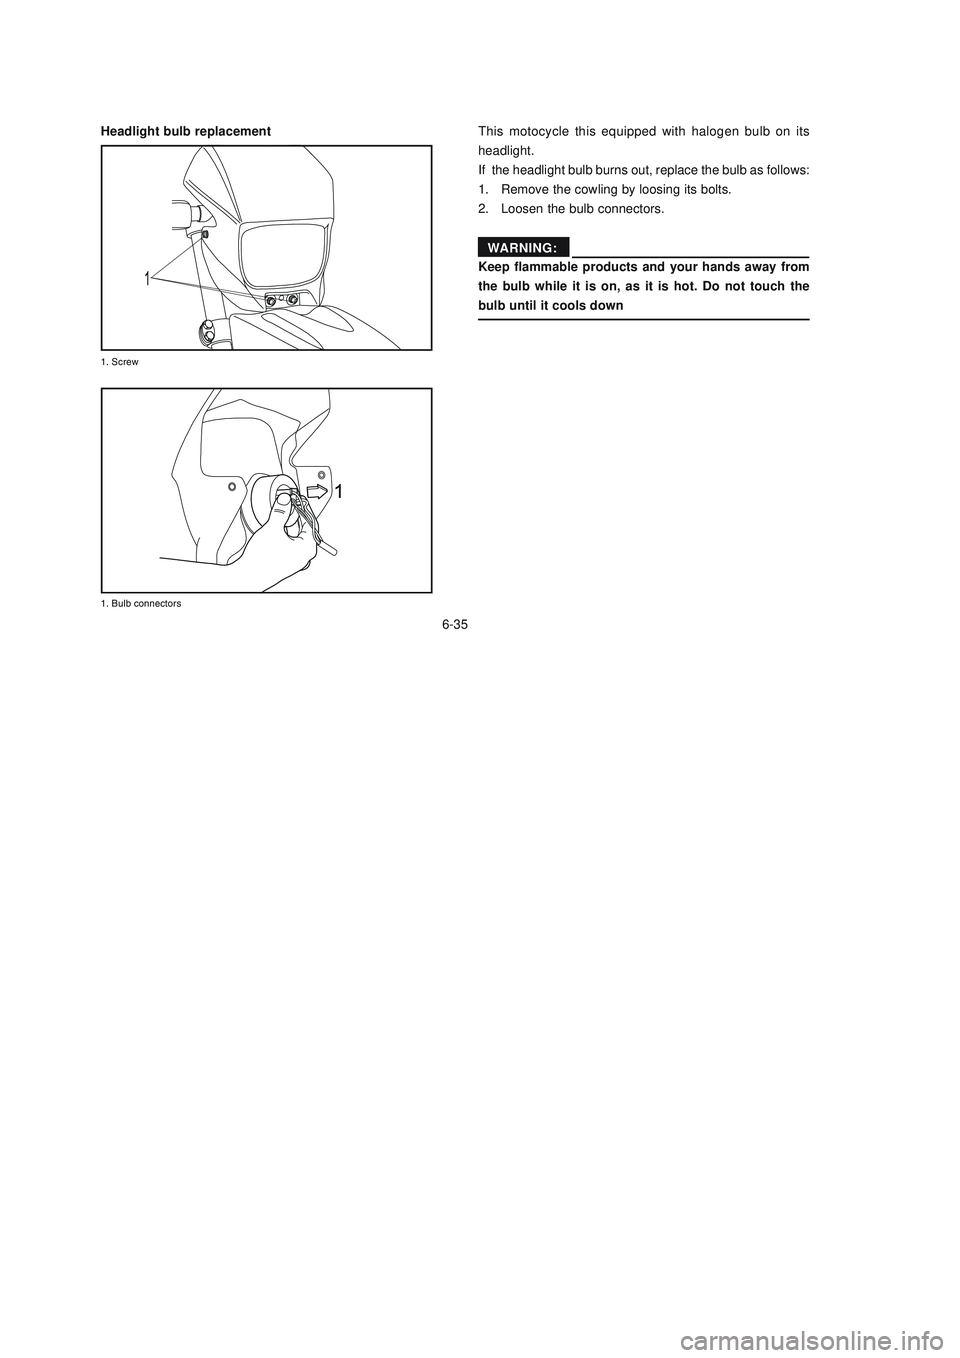 YAMAHA XTZ125 2007  Owners Manual 6-35
6-35
Headlight bulb replacementThis motocycle this equipped with halogen bulb on its
headlight.
If  the headlight bulb burns out, replace the bulb as follows:
1. Remove the cowling by loosing its